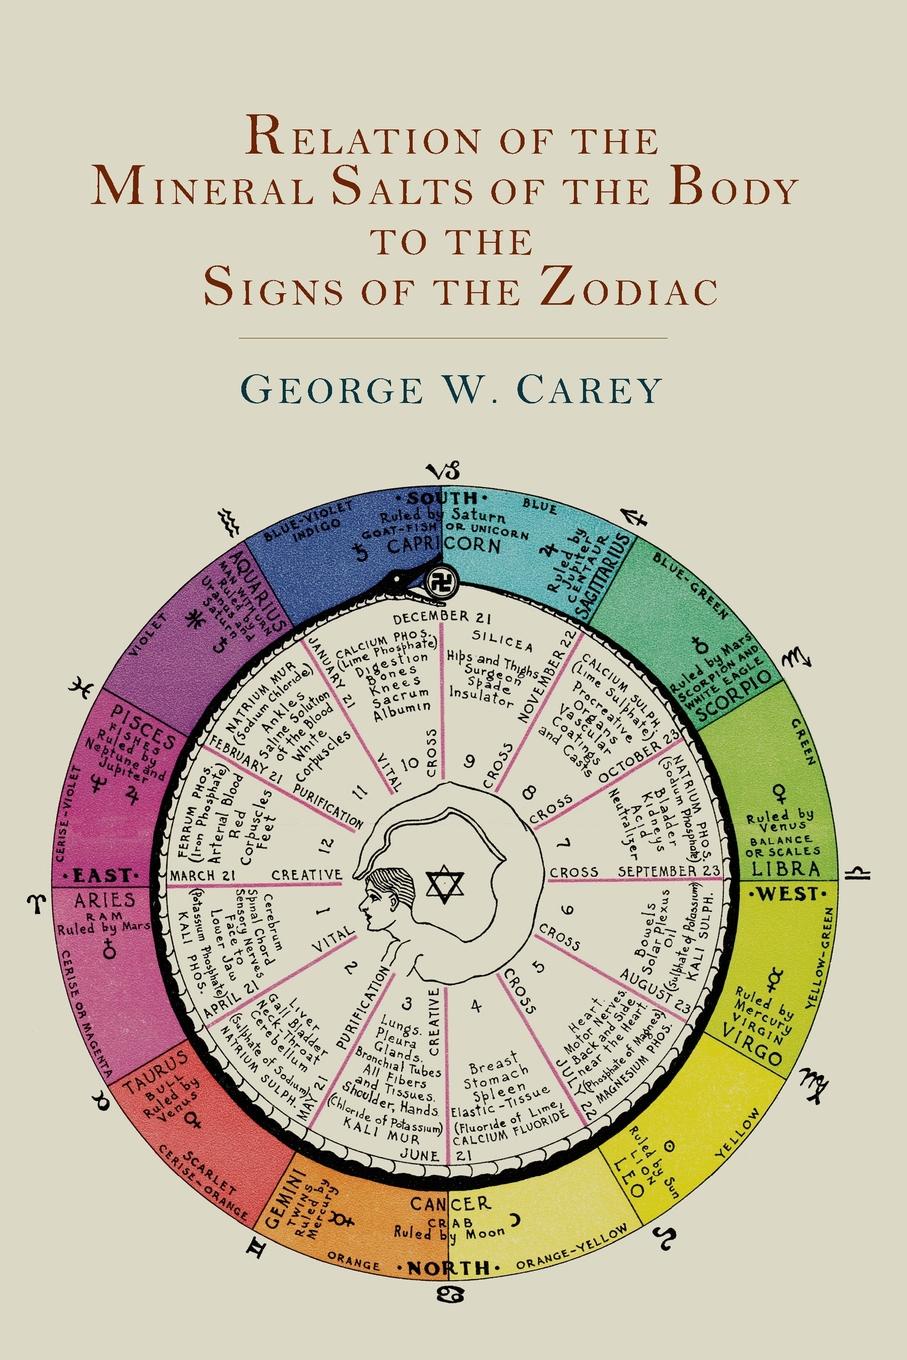 George W. Carey Relation of the Mineral Salts of the Body to the Signs of the Zodiac